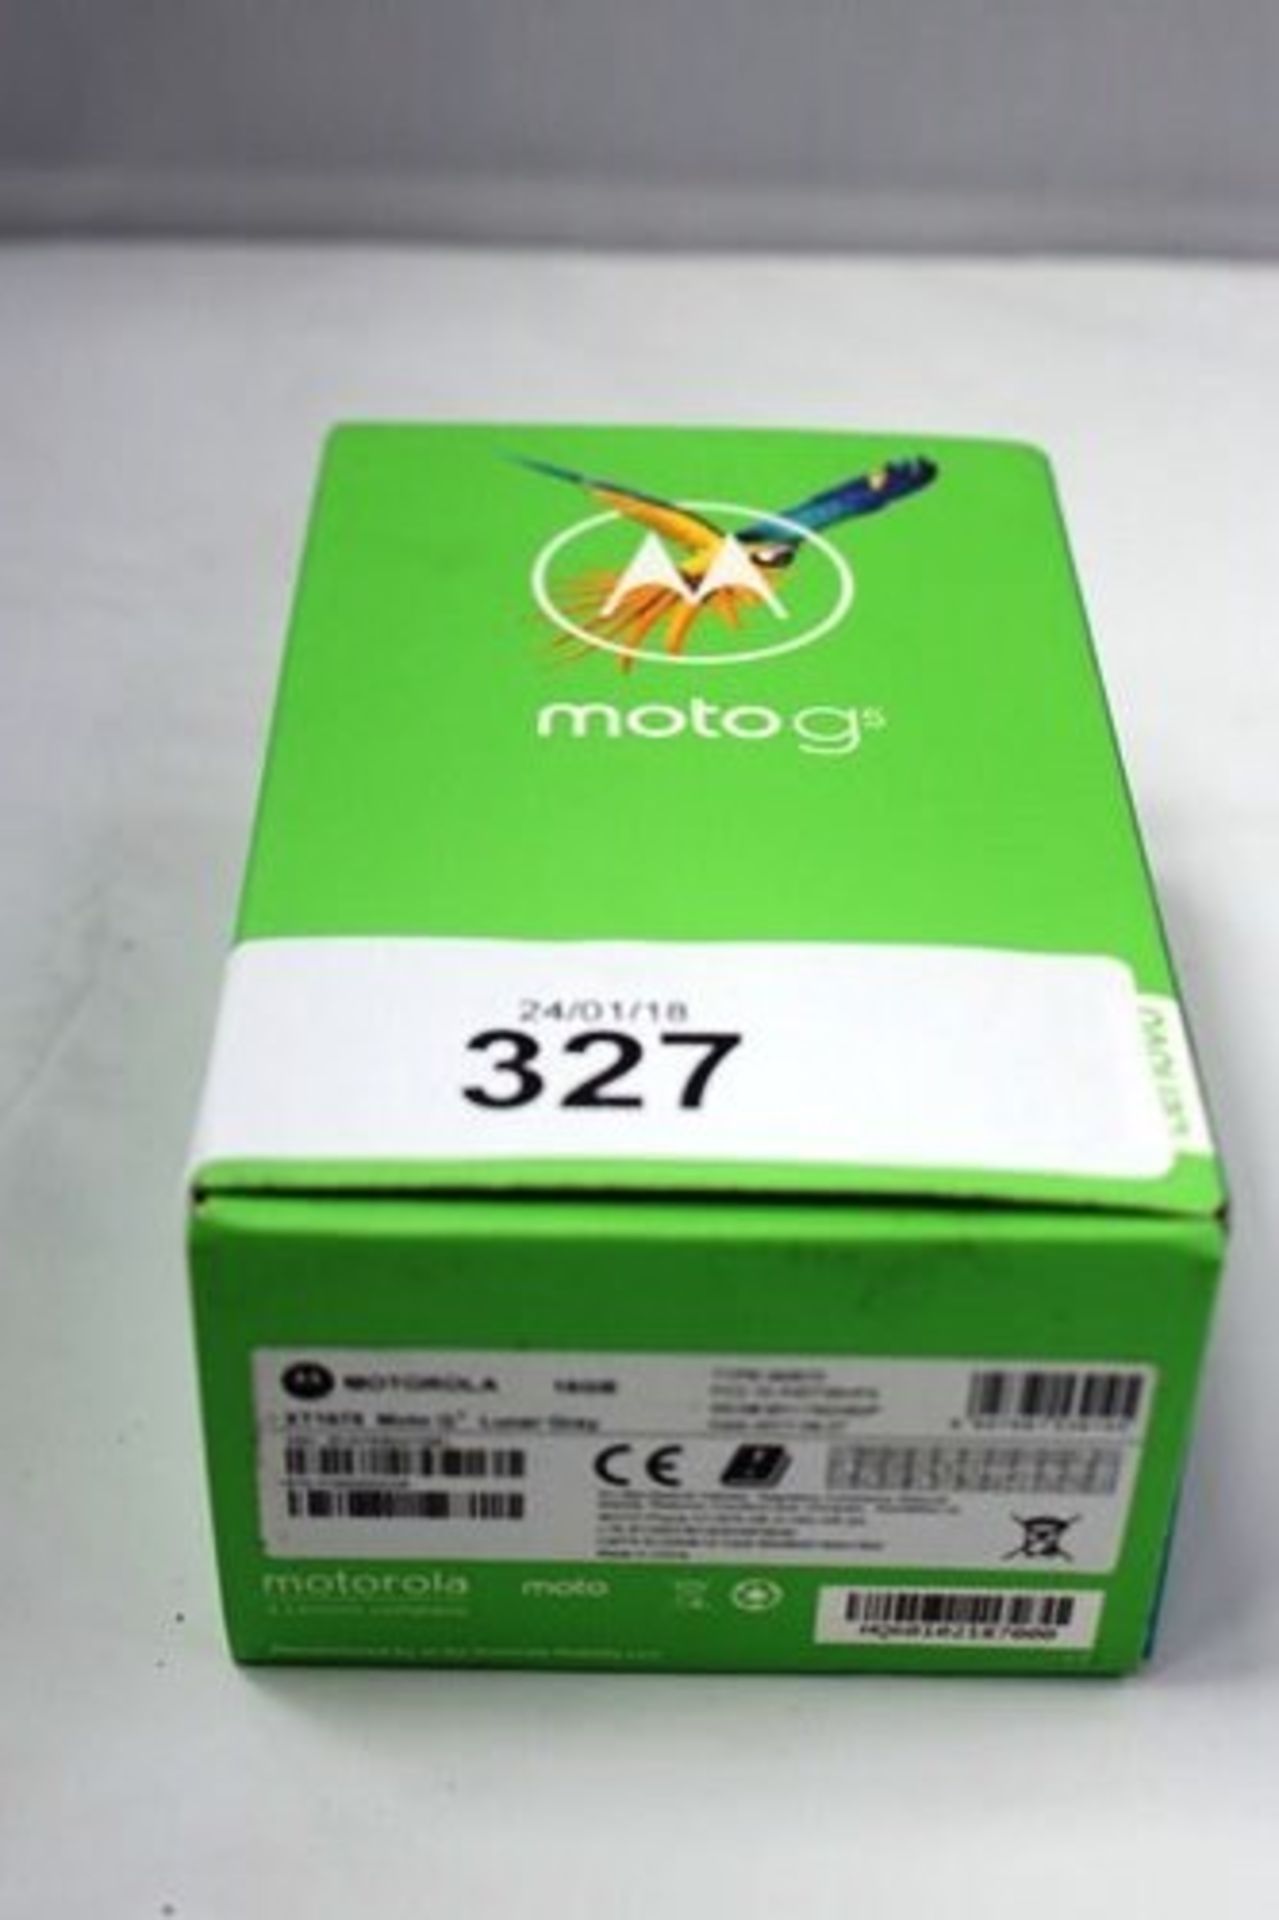 Moto G5 smartphone, 16gb, type M2675, XT1675, Moto G5 lunar grey - New in sealed box. These phones